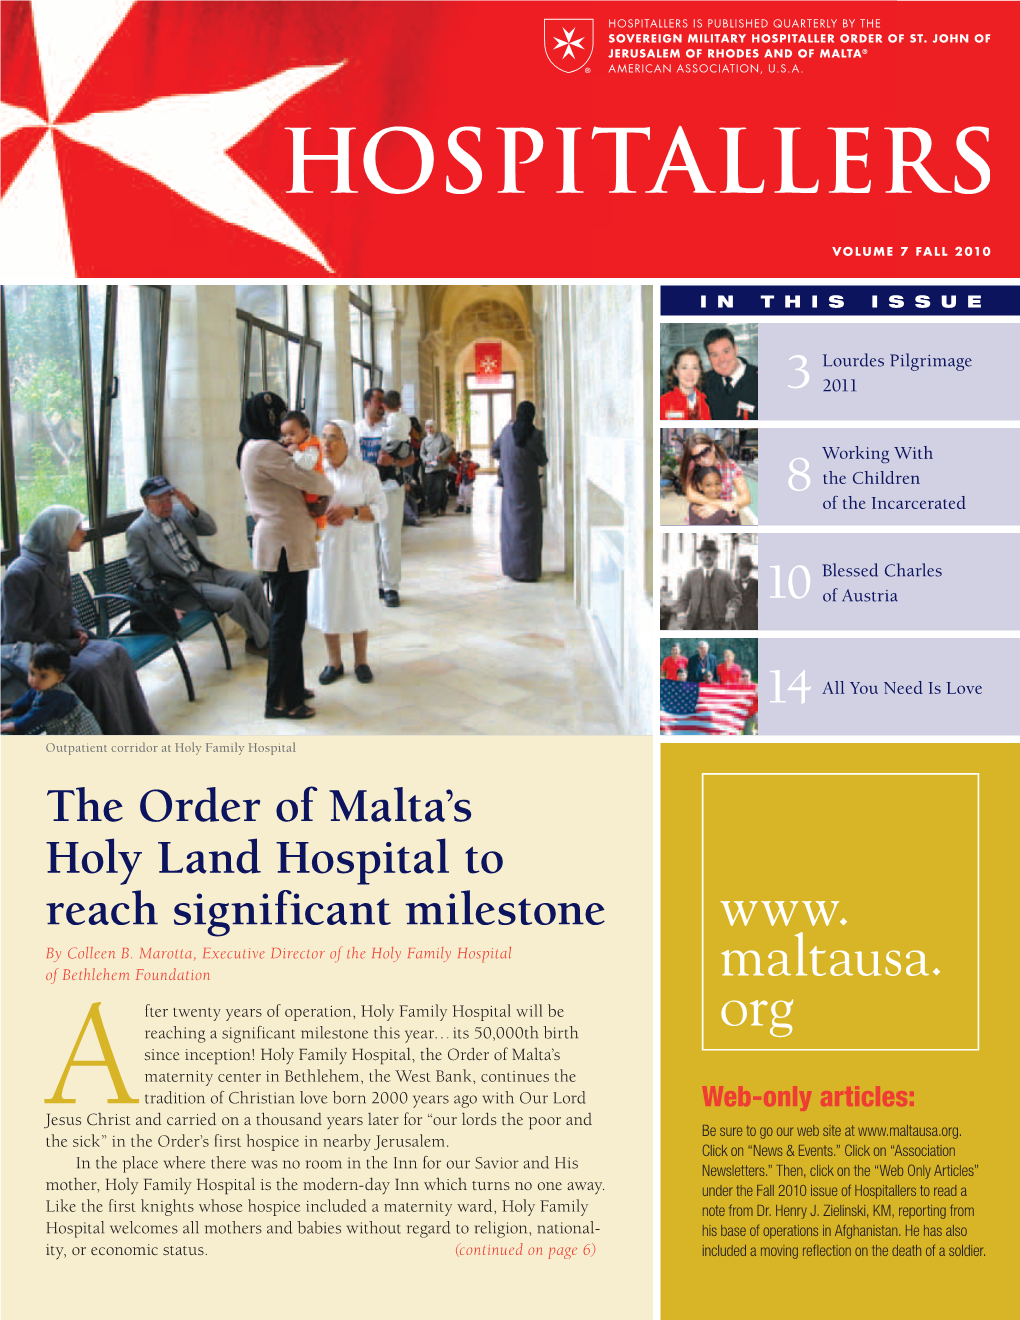 The Order of Malta's Holy Land Hospital to Reach Significant Milestone